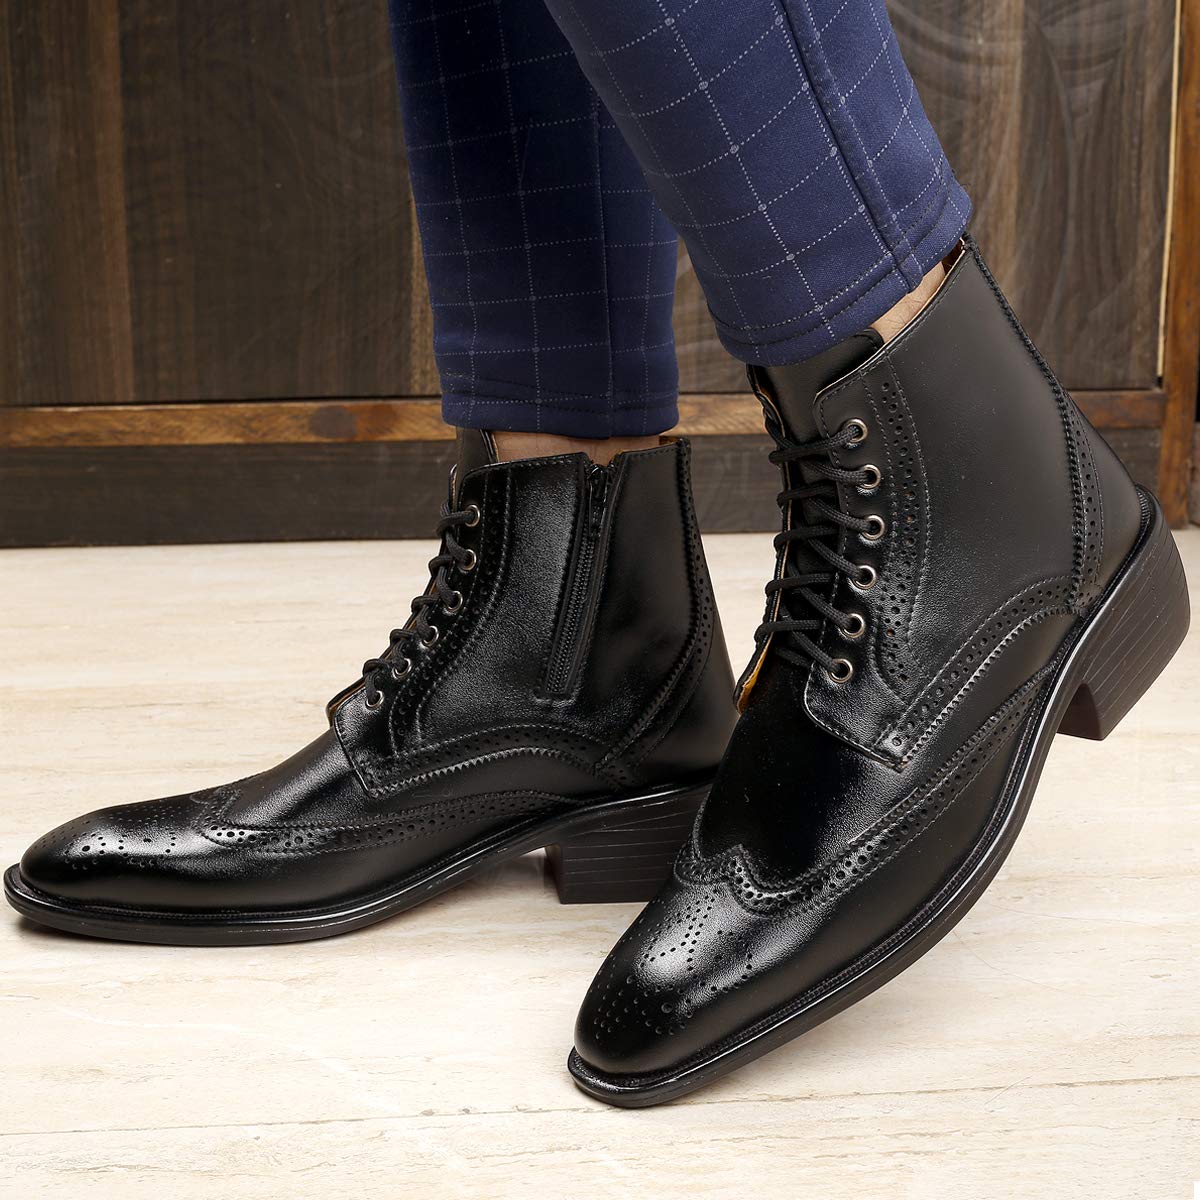 High Ankle Height Increasing Black Casual And Outdoor Boot For Men-Unique and Classy